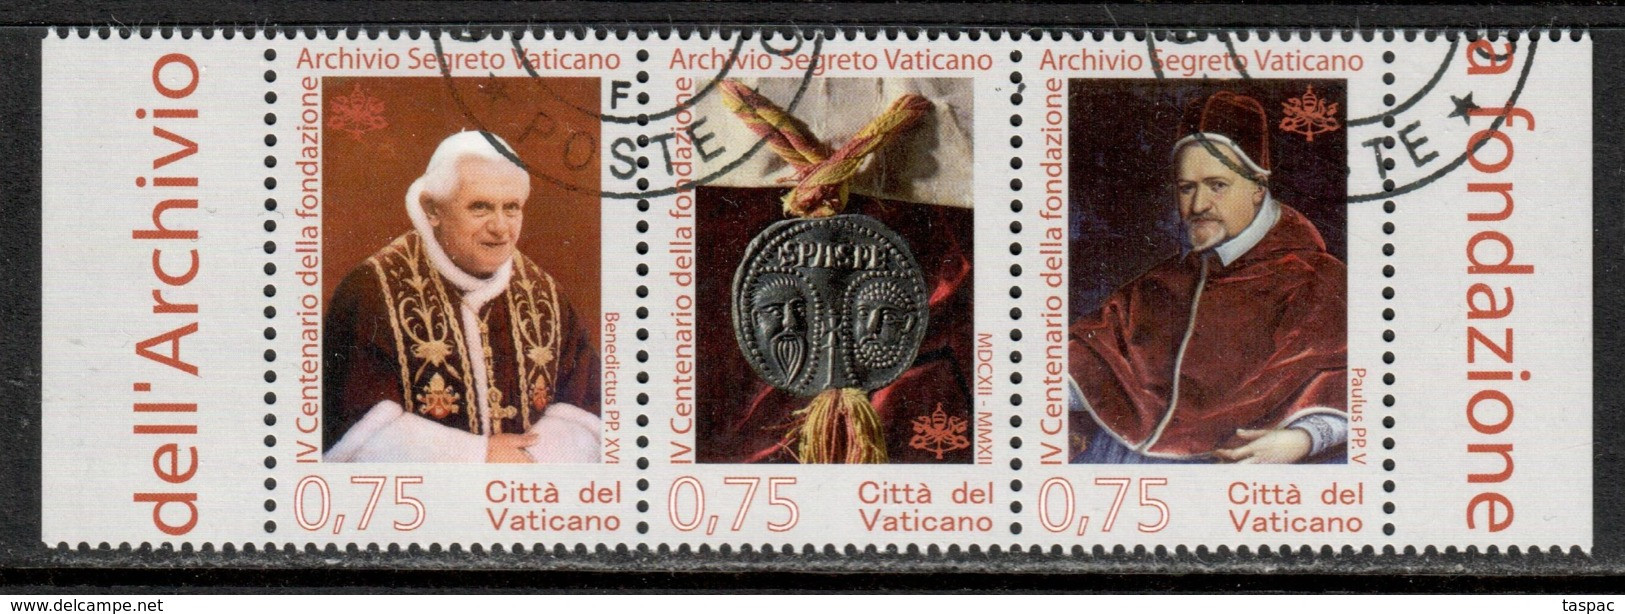 Vatican 2012 Mi# 1745-1747 Used - Strip Of 3 - 4th Centenary Of The Vatican Secret Archives - Usados